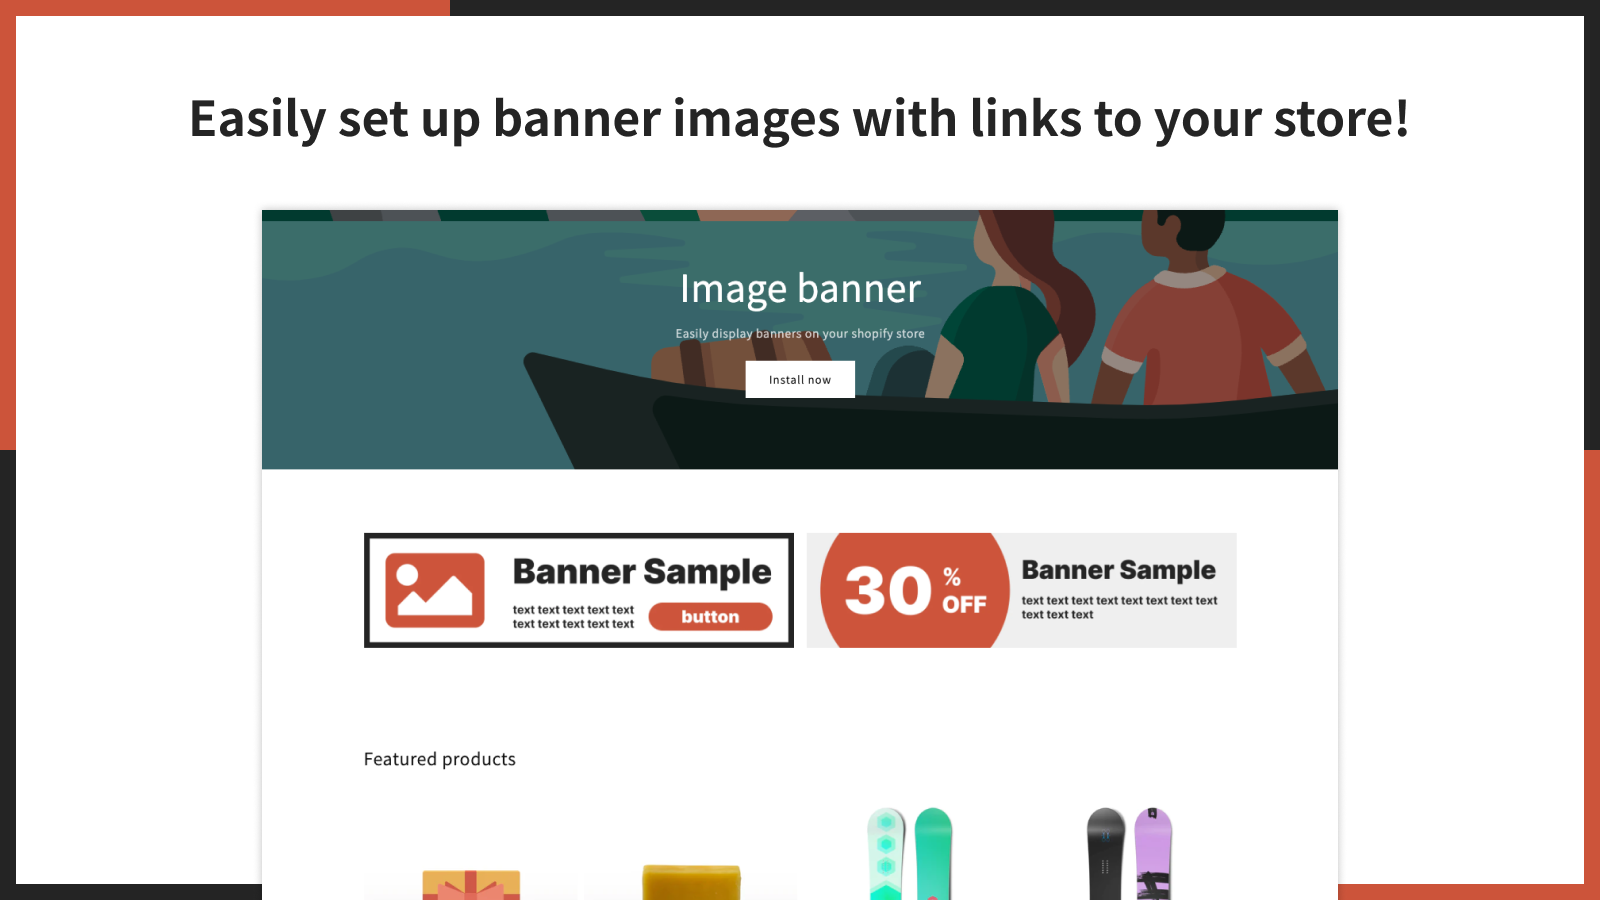 Easily set up banner images with links to your store.